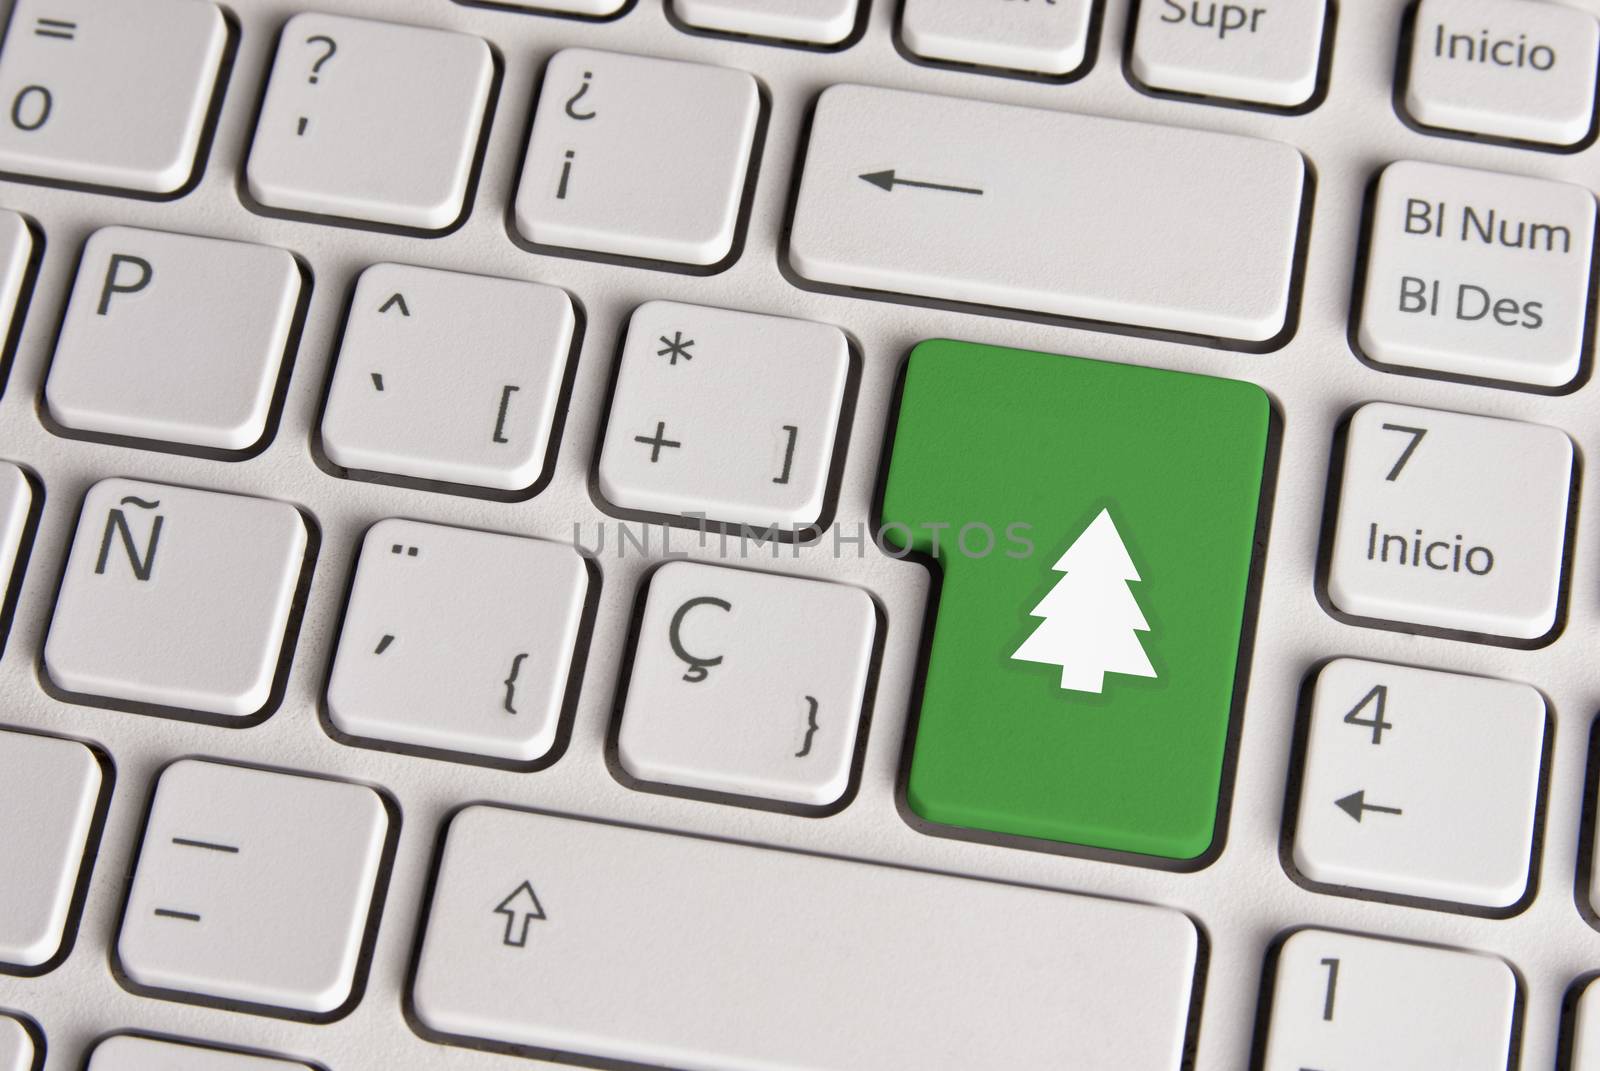 Spanish keyboard with Merry Christmas tree icon over green background button. Image with clipping path for easy change the key color and editing.